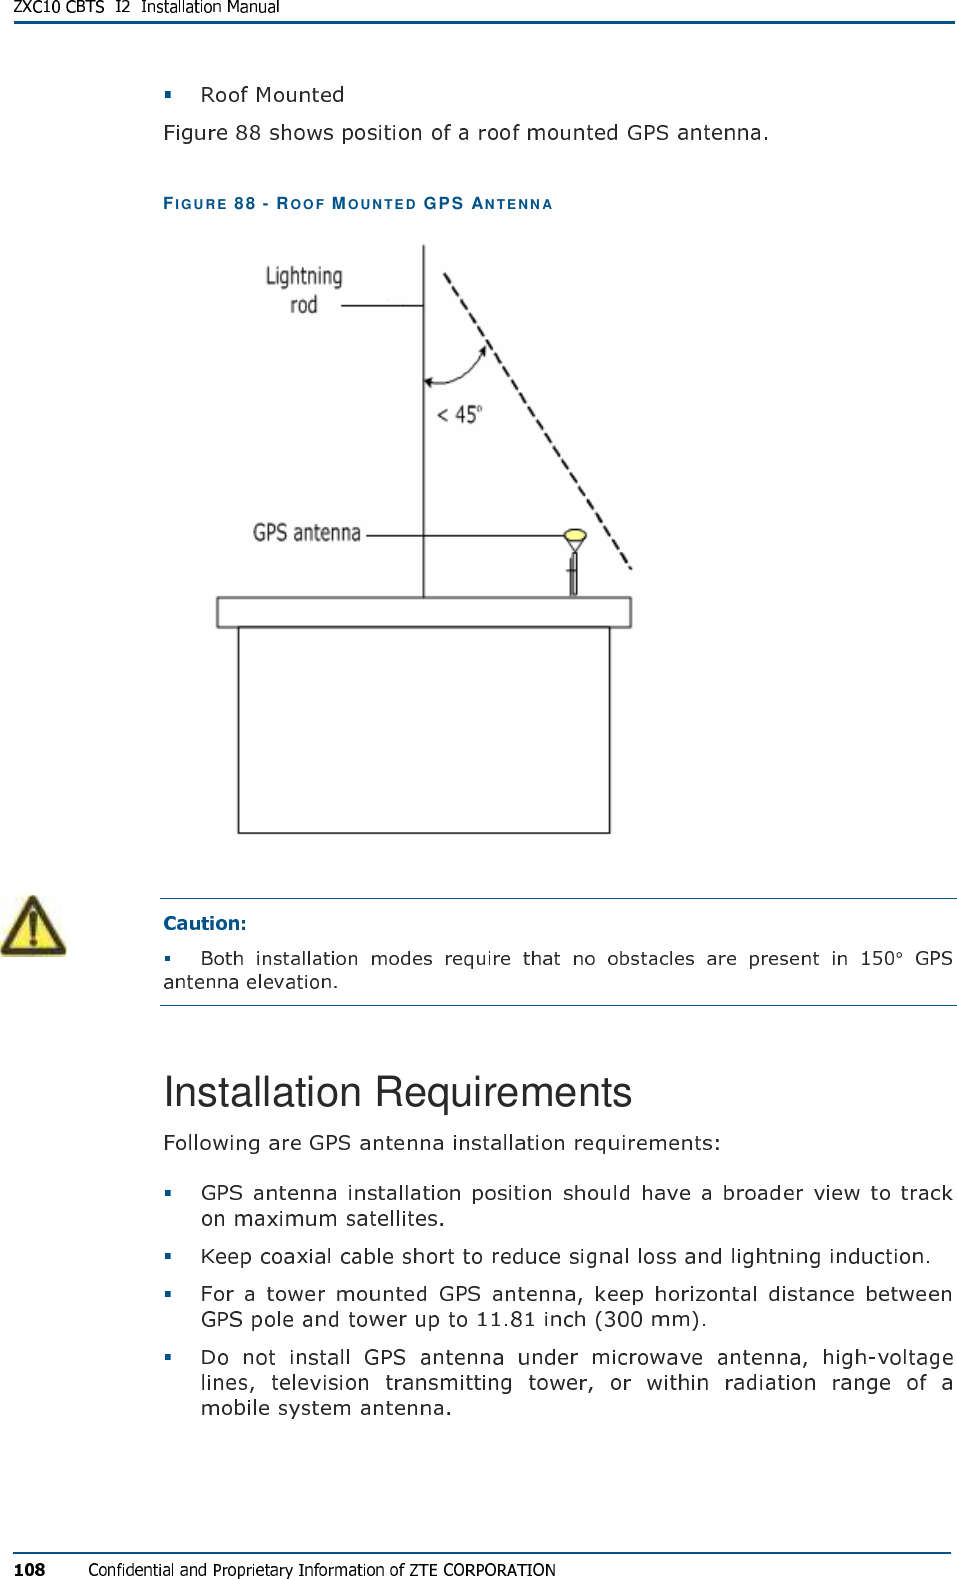  FIG U R E   88 - RO OF  MOU NT ED  GPS AN T E N N A    °Installation Requirements       